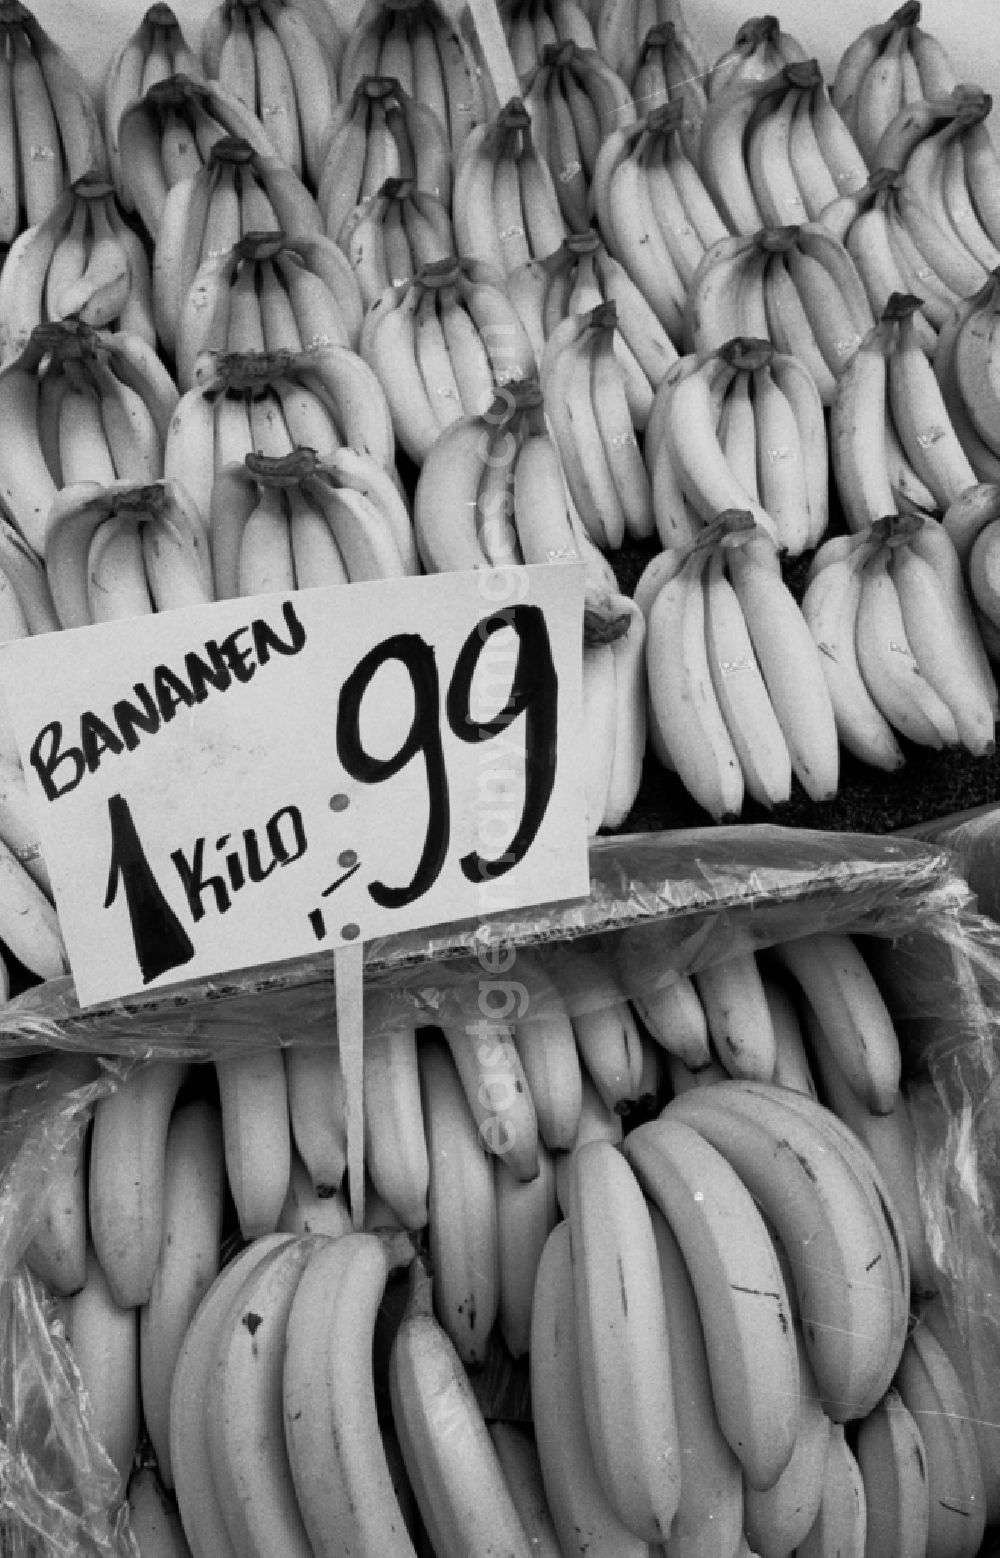 GDR image archive: Berlin - Sale of bananas at a market stall. Price tags indicate the price,